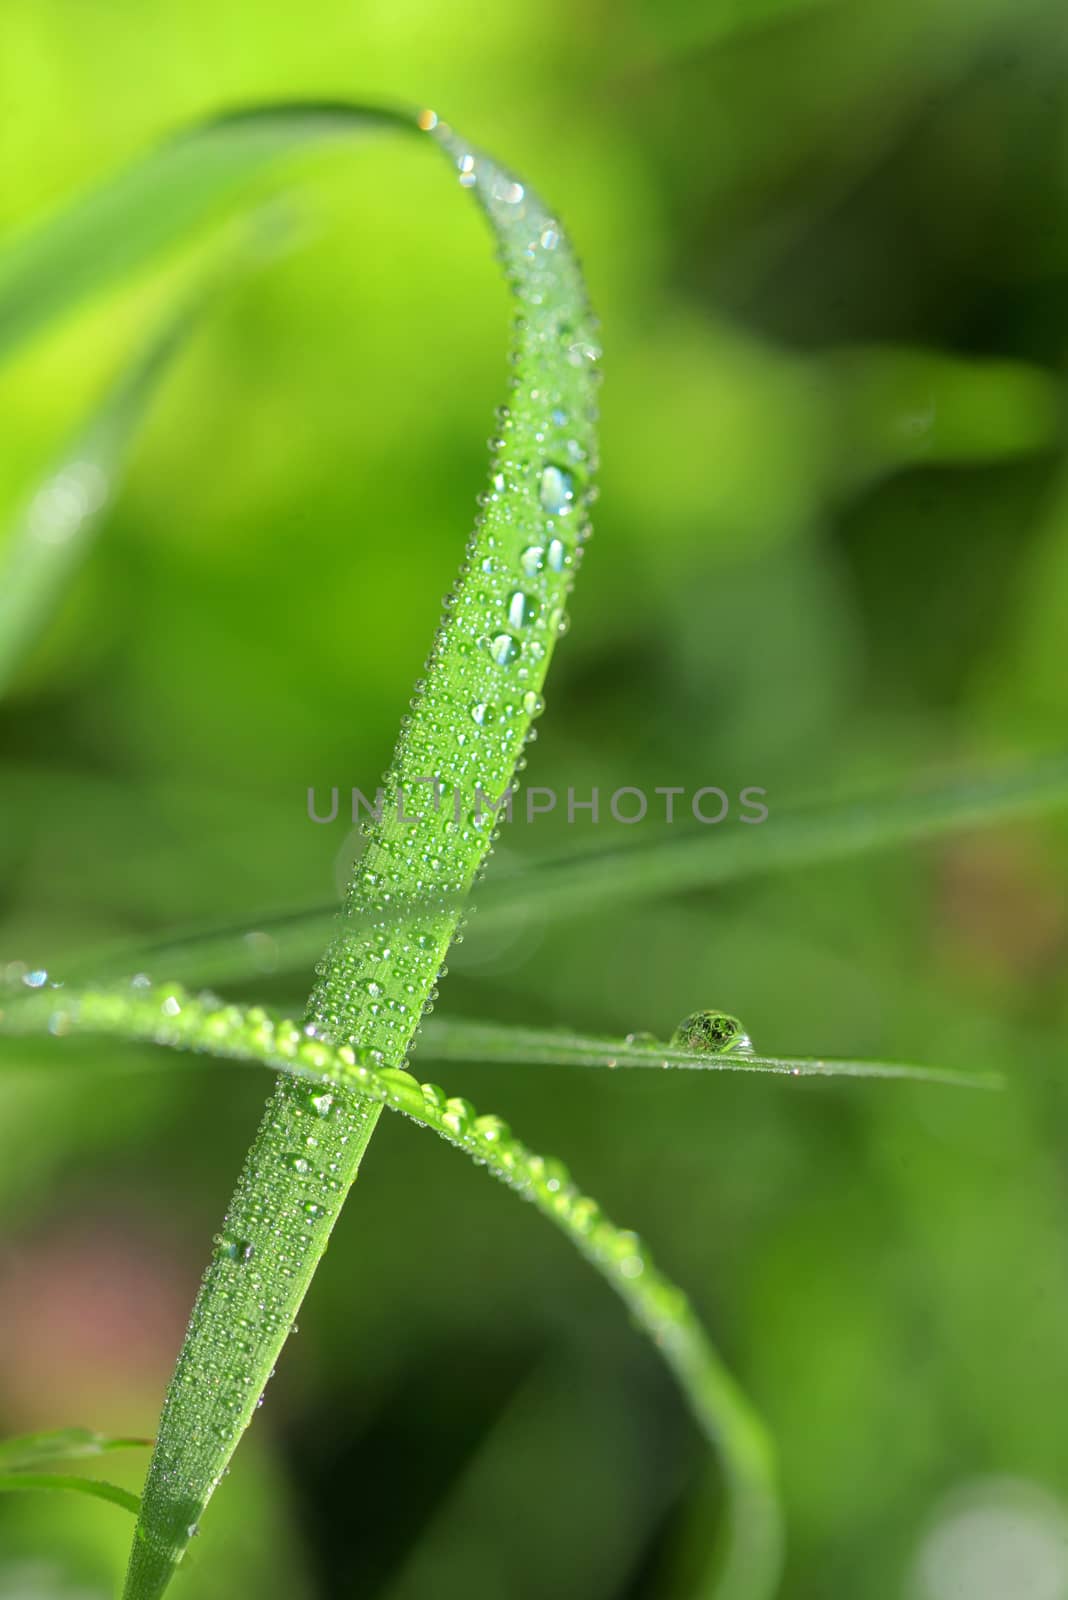 Dew drops close up by mady70